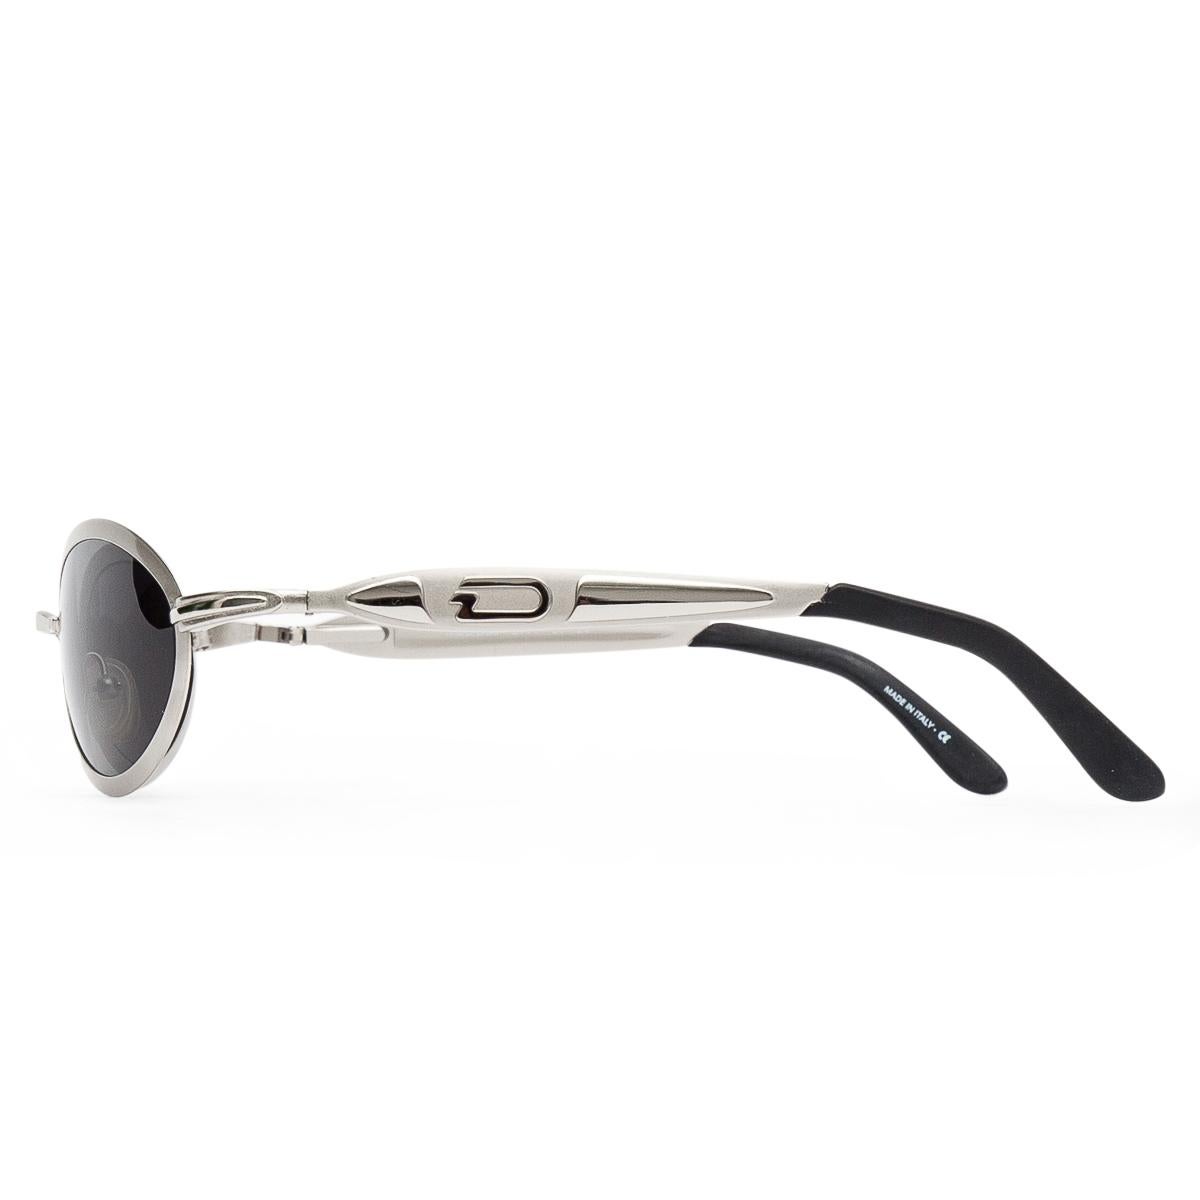 Original Derapage pair of vintage sunglasses made in Italy in the 90's. Oval and metal model. The end-part of the temple is made in acetate for more comfort. Uniform grey lenses.

Measurements
- Distance between temples = 130 mm
- Temple length =